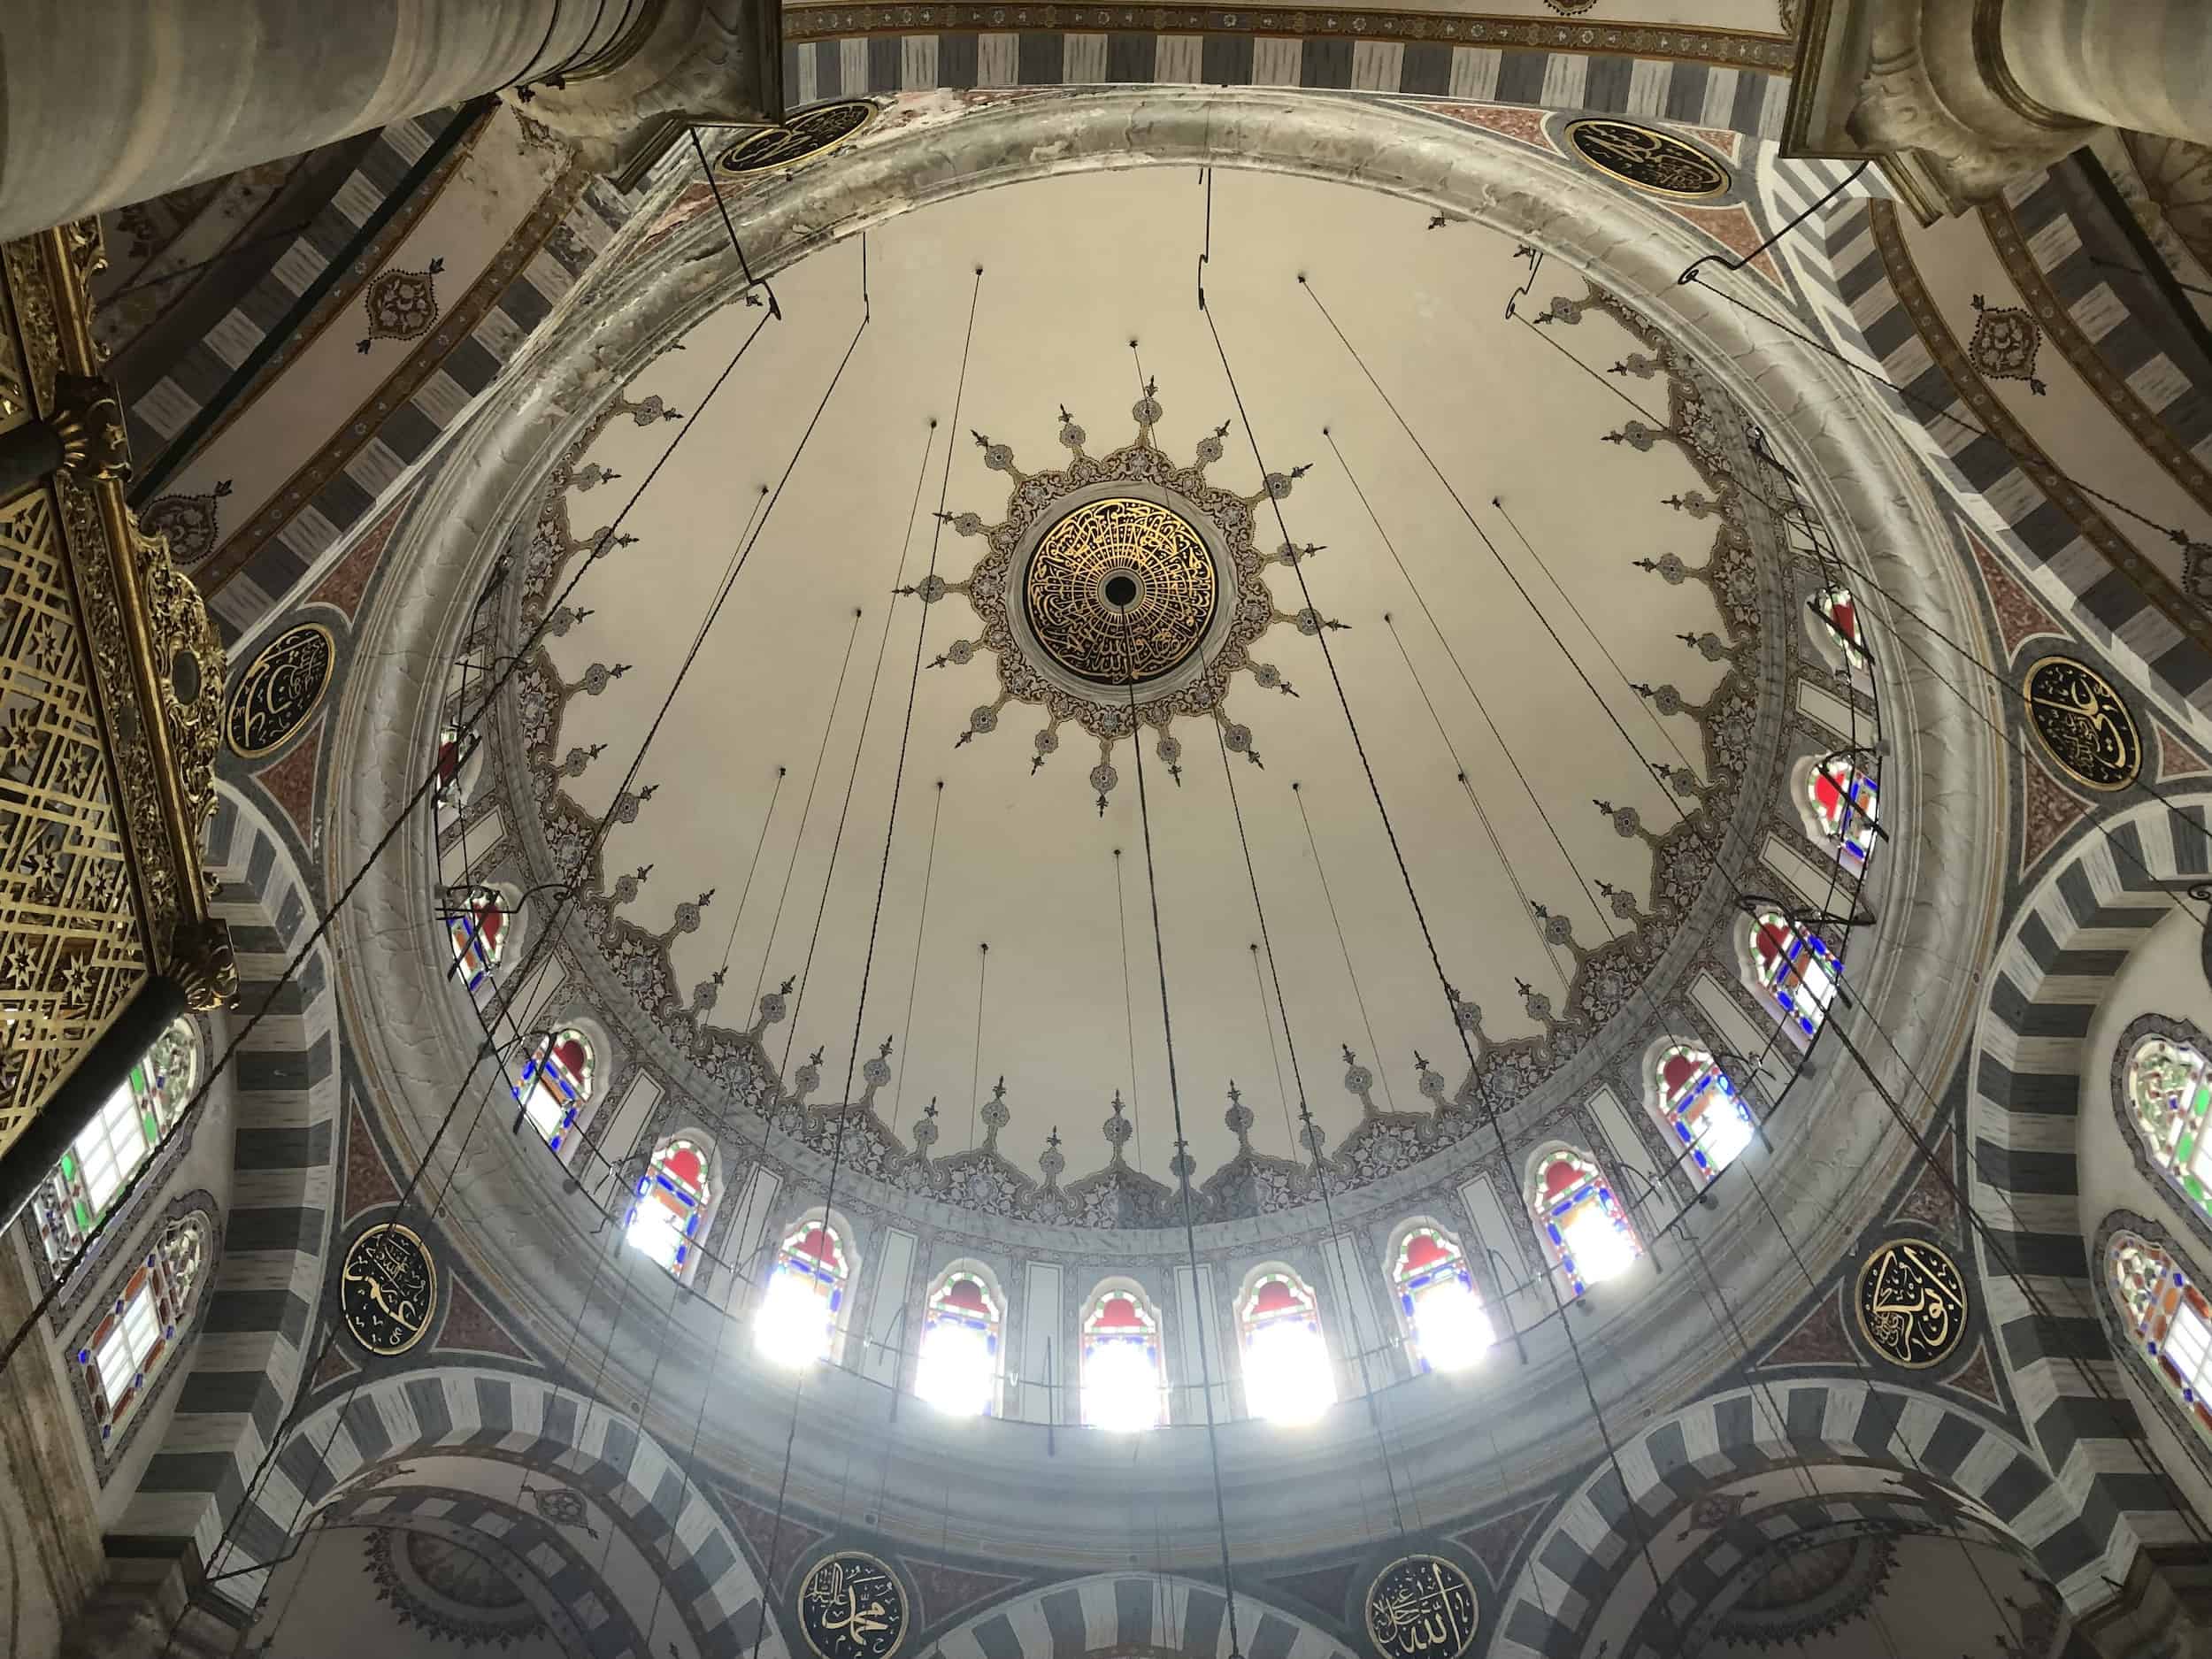 Dome of the Laleli Mosque in Laleli, Istanbul, Turkey